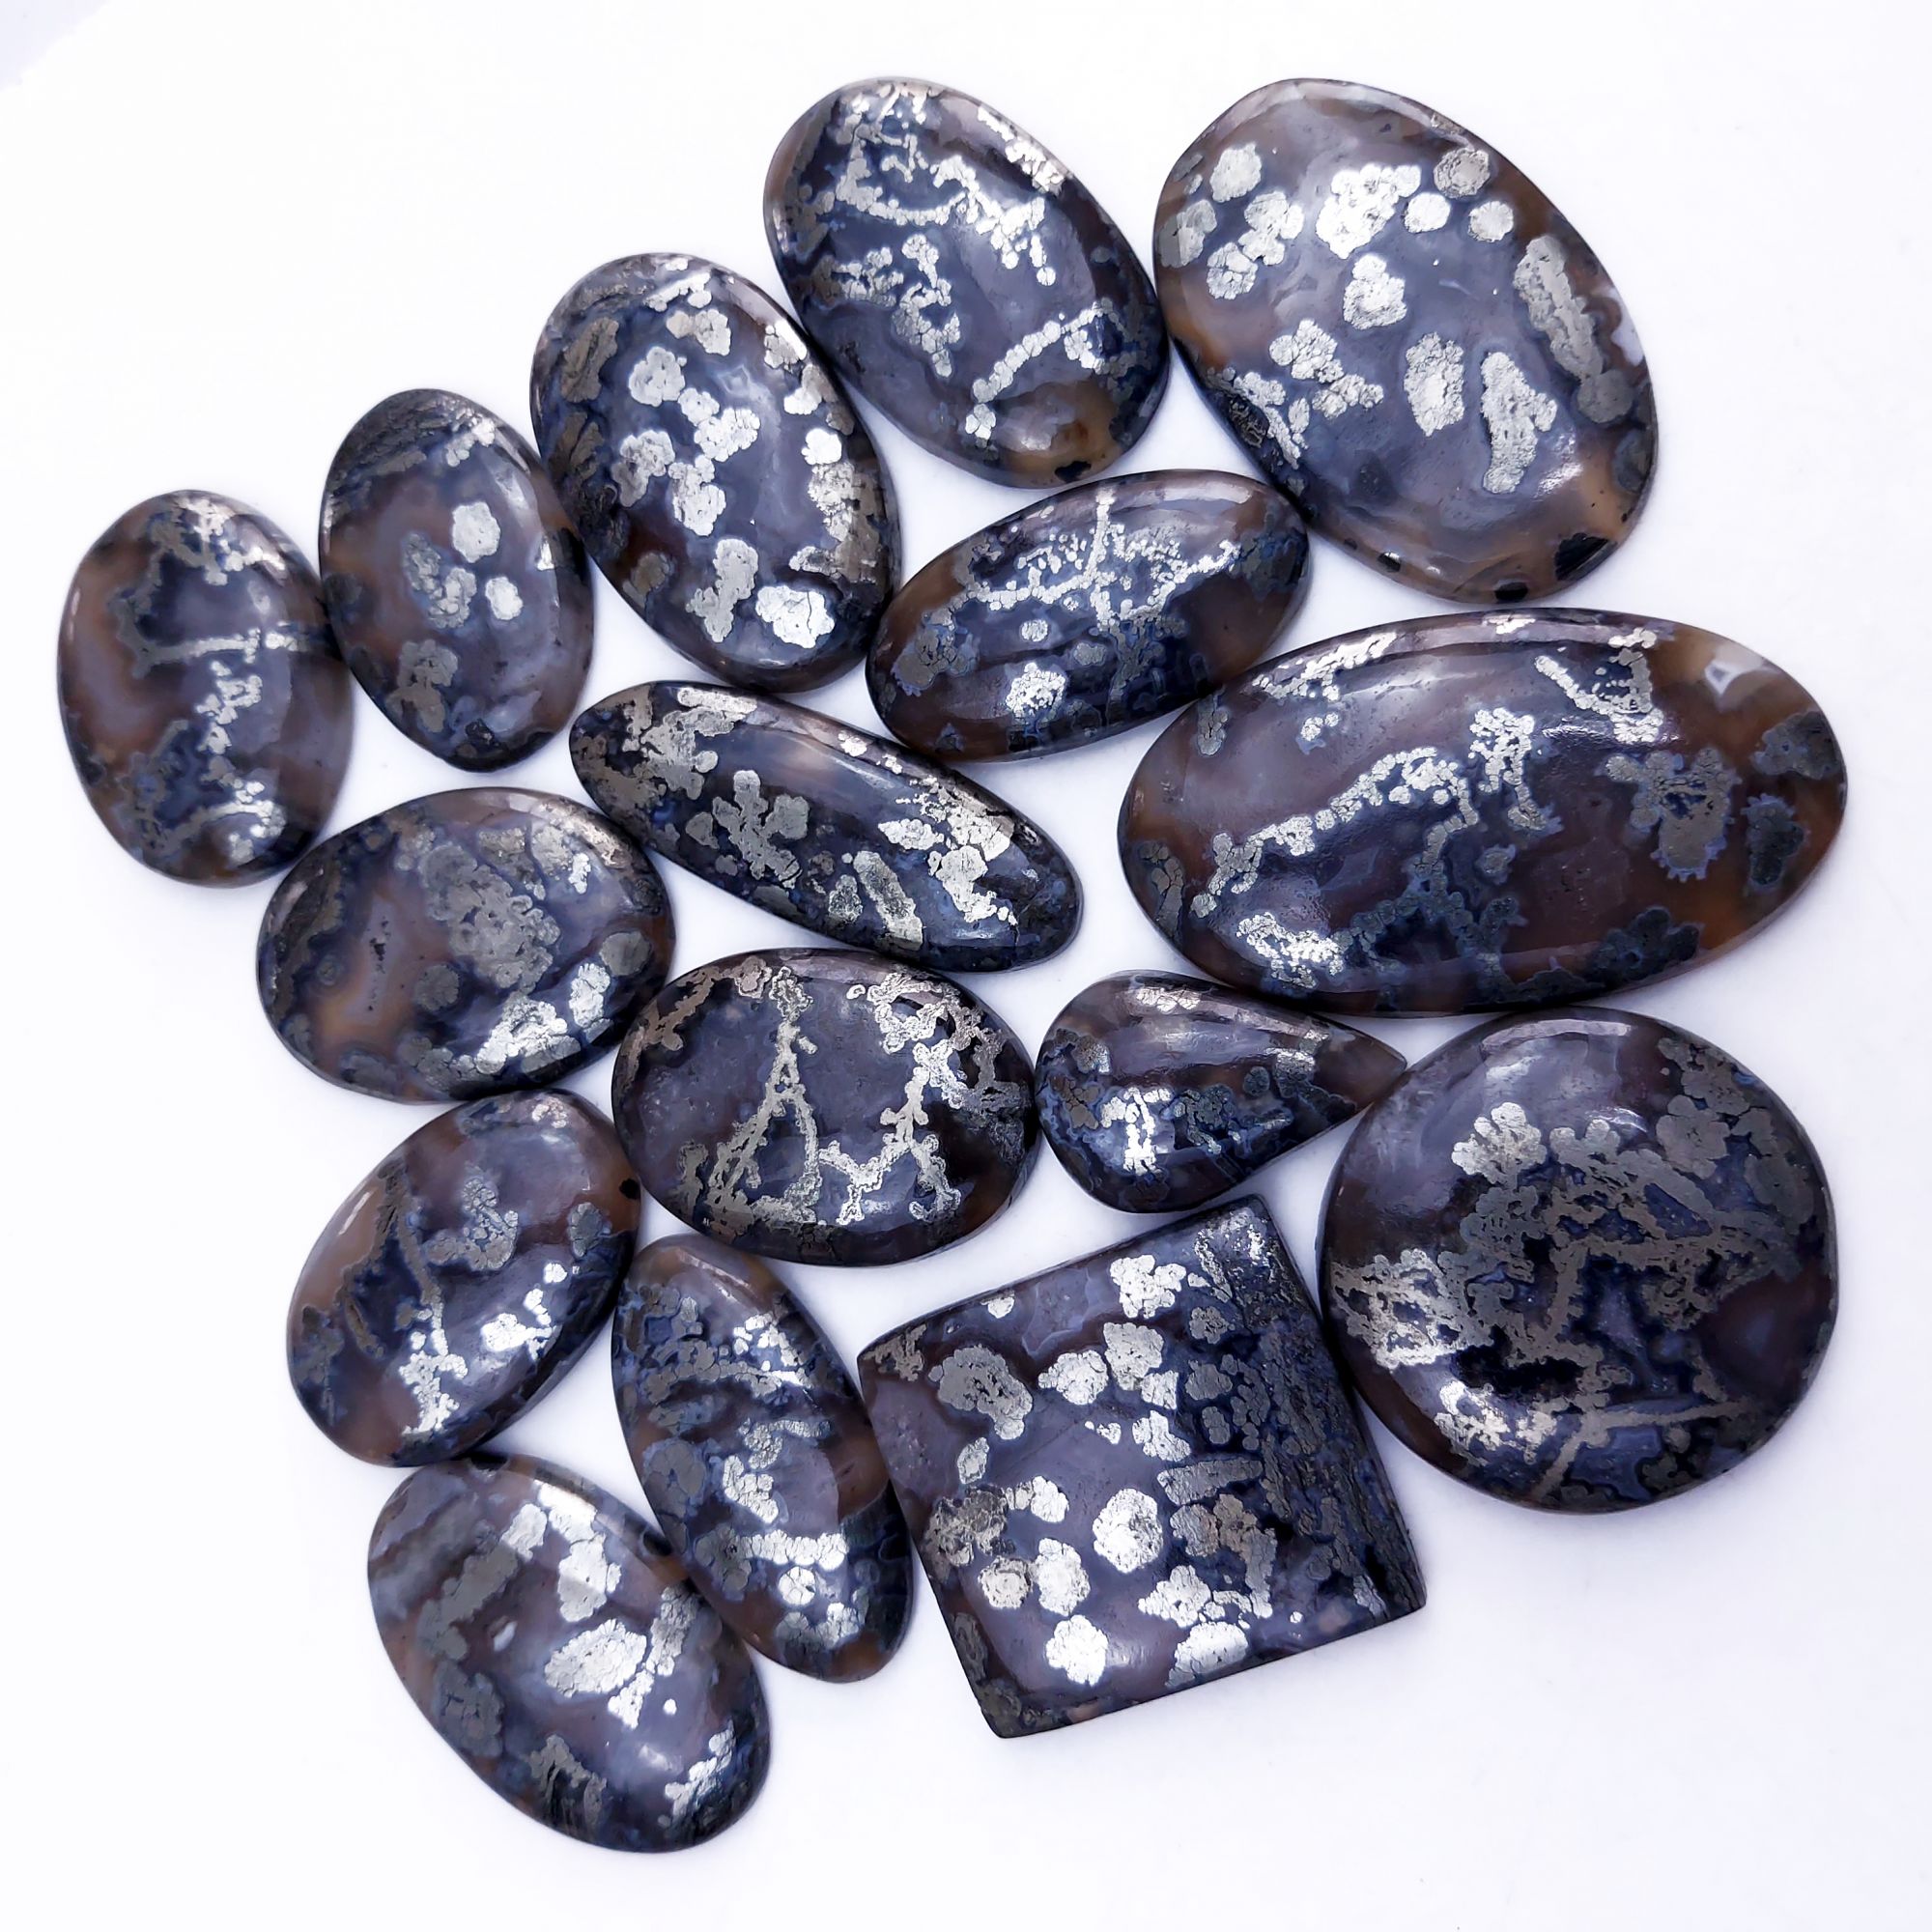 16Pcs 807Cts Natural Marcasite Grey Cabochon Back Side Unpolished Gemstone Semi-Precious Gemstones For Jewelry Making 50x28 25x17mm #10042